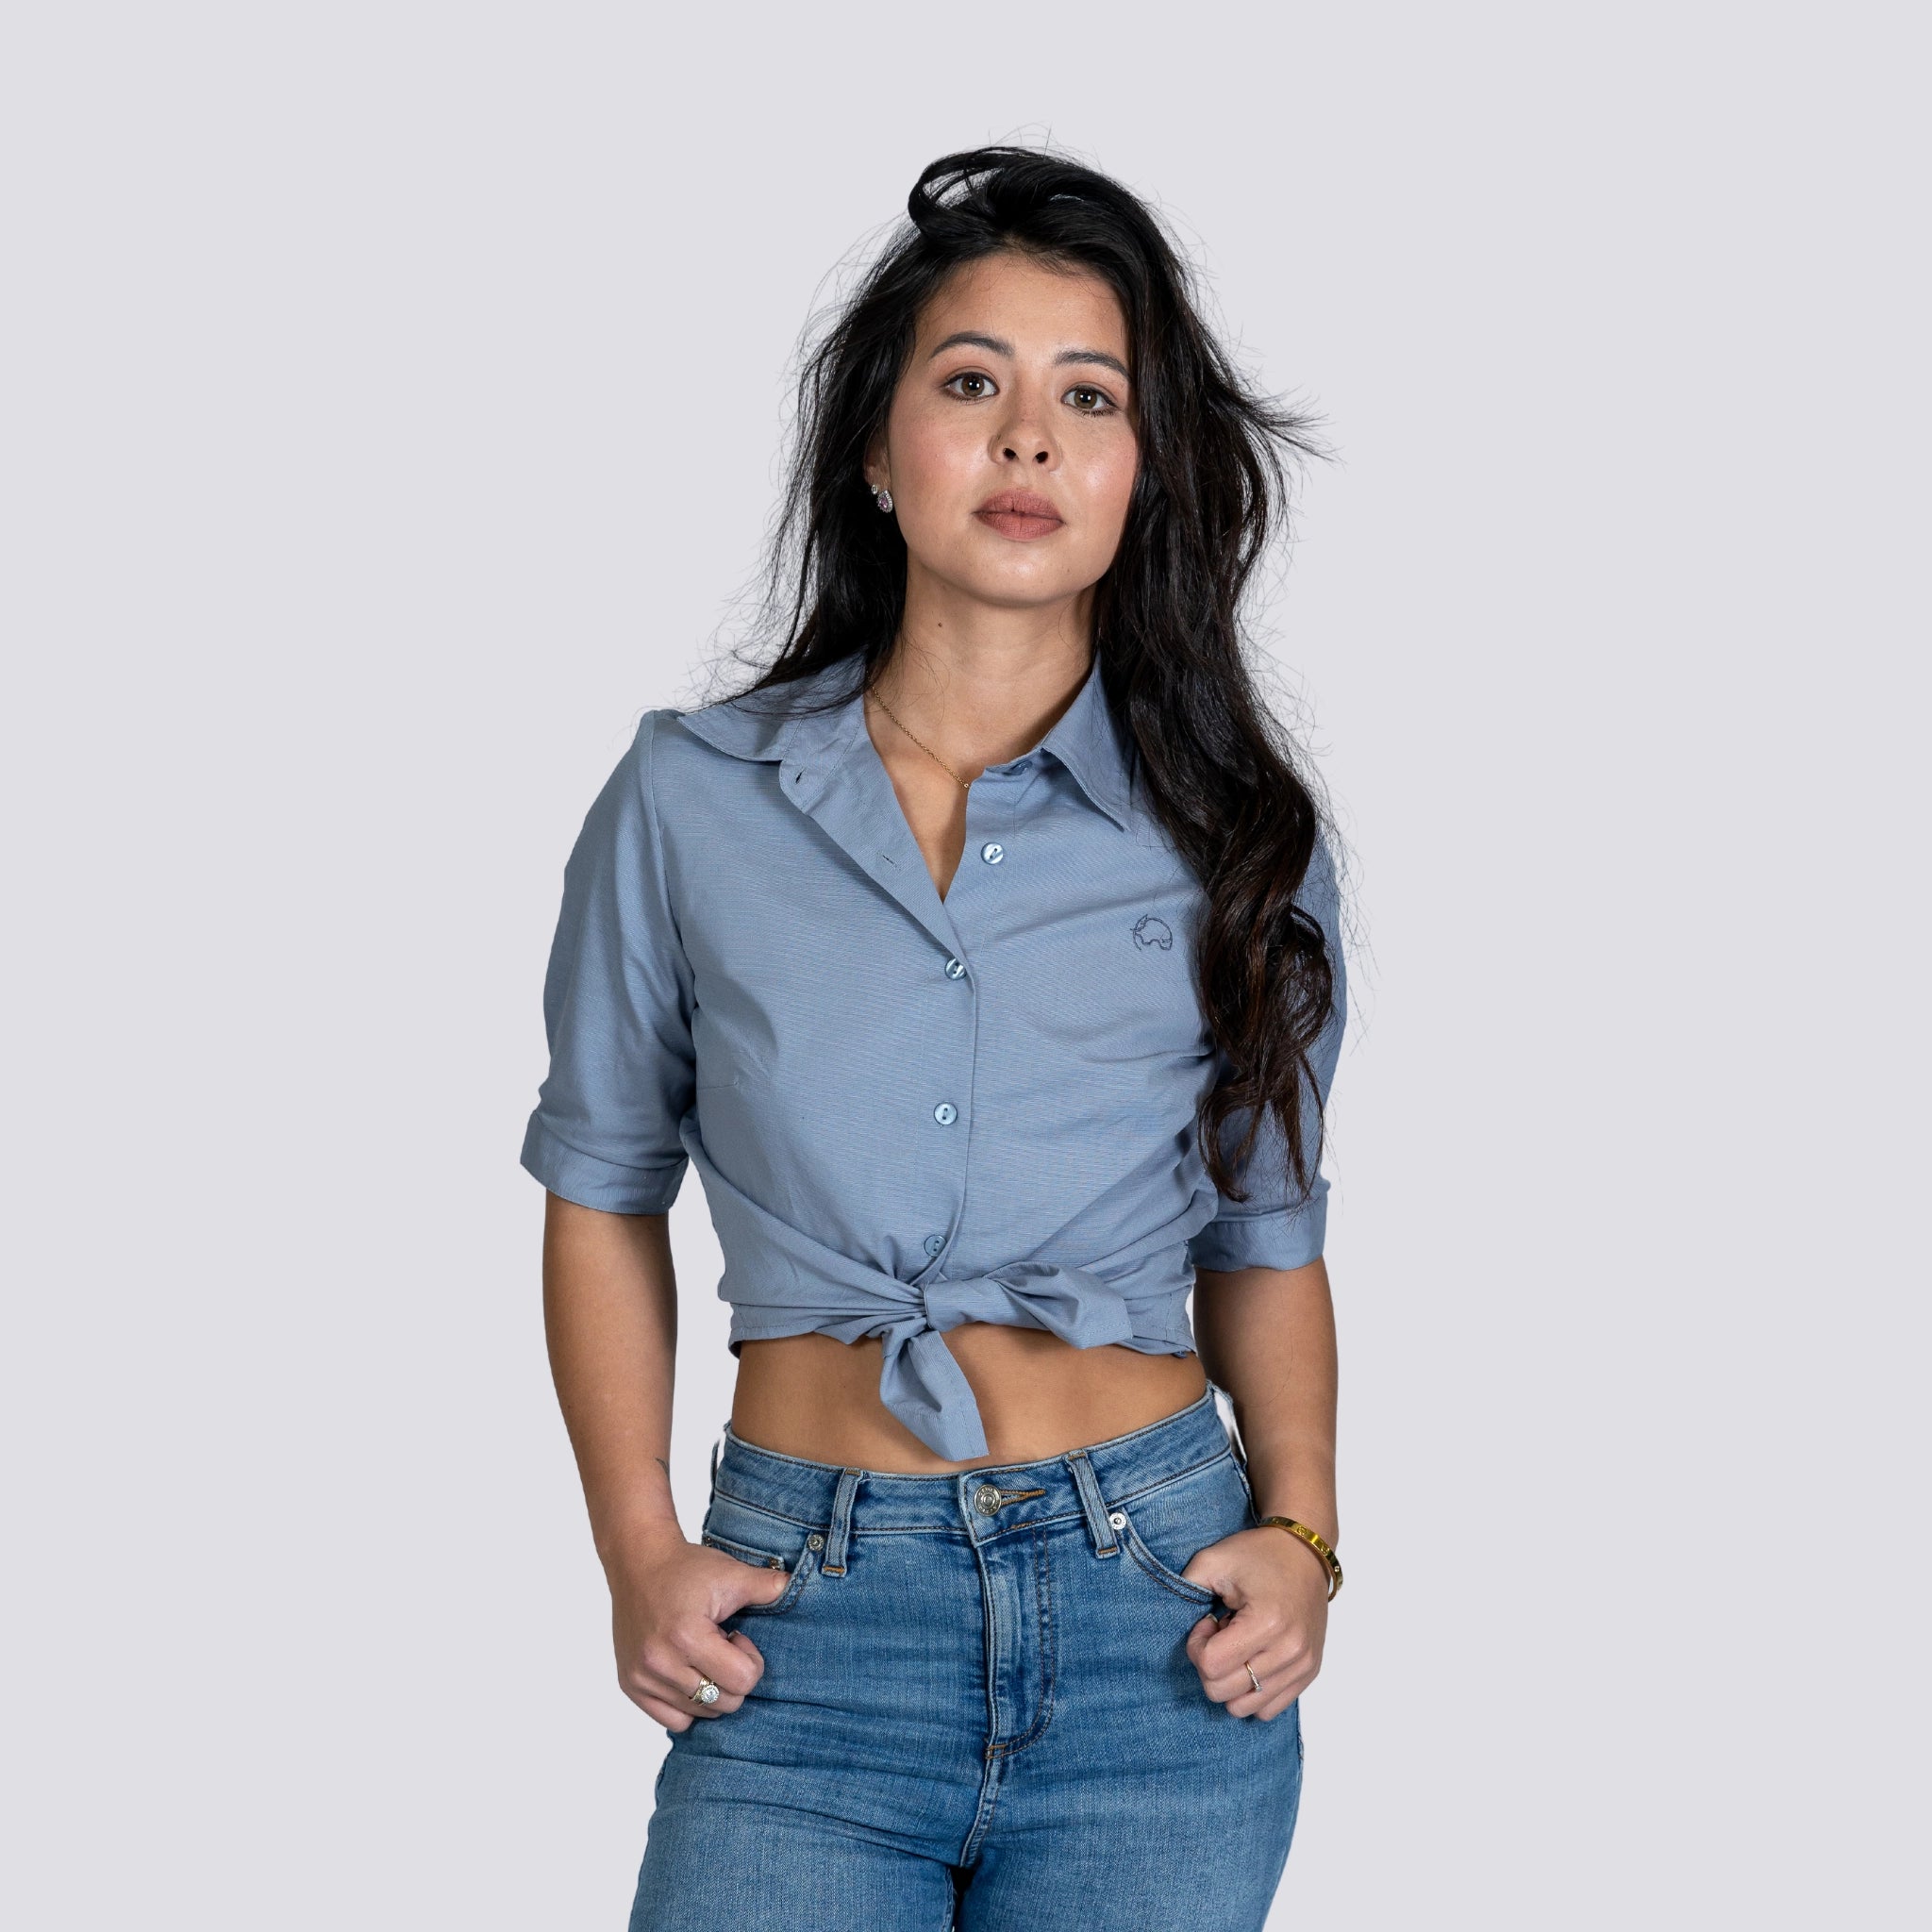 A young woman with long black hair wearing a versatile essential, Grey Mist Linen Shirt For Women by Karee, and jeans stands against a gray background.